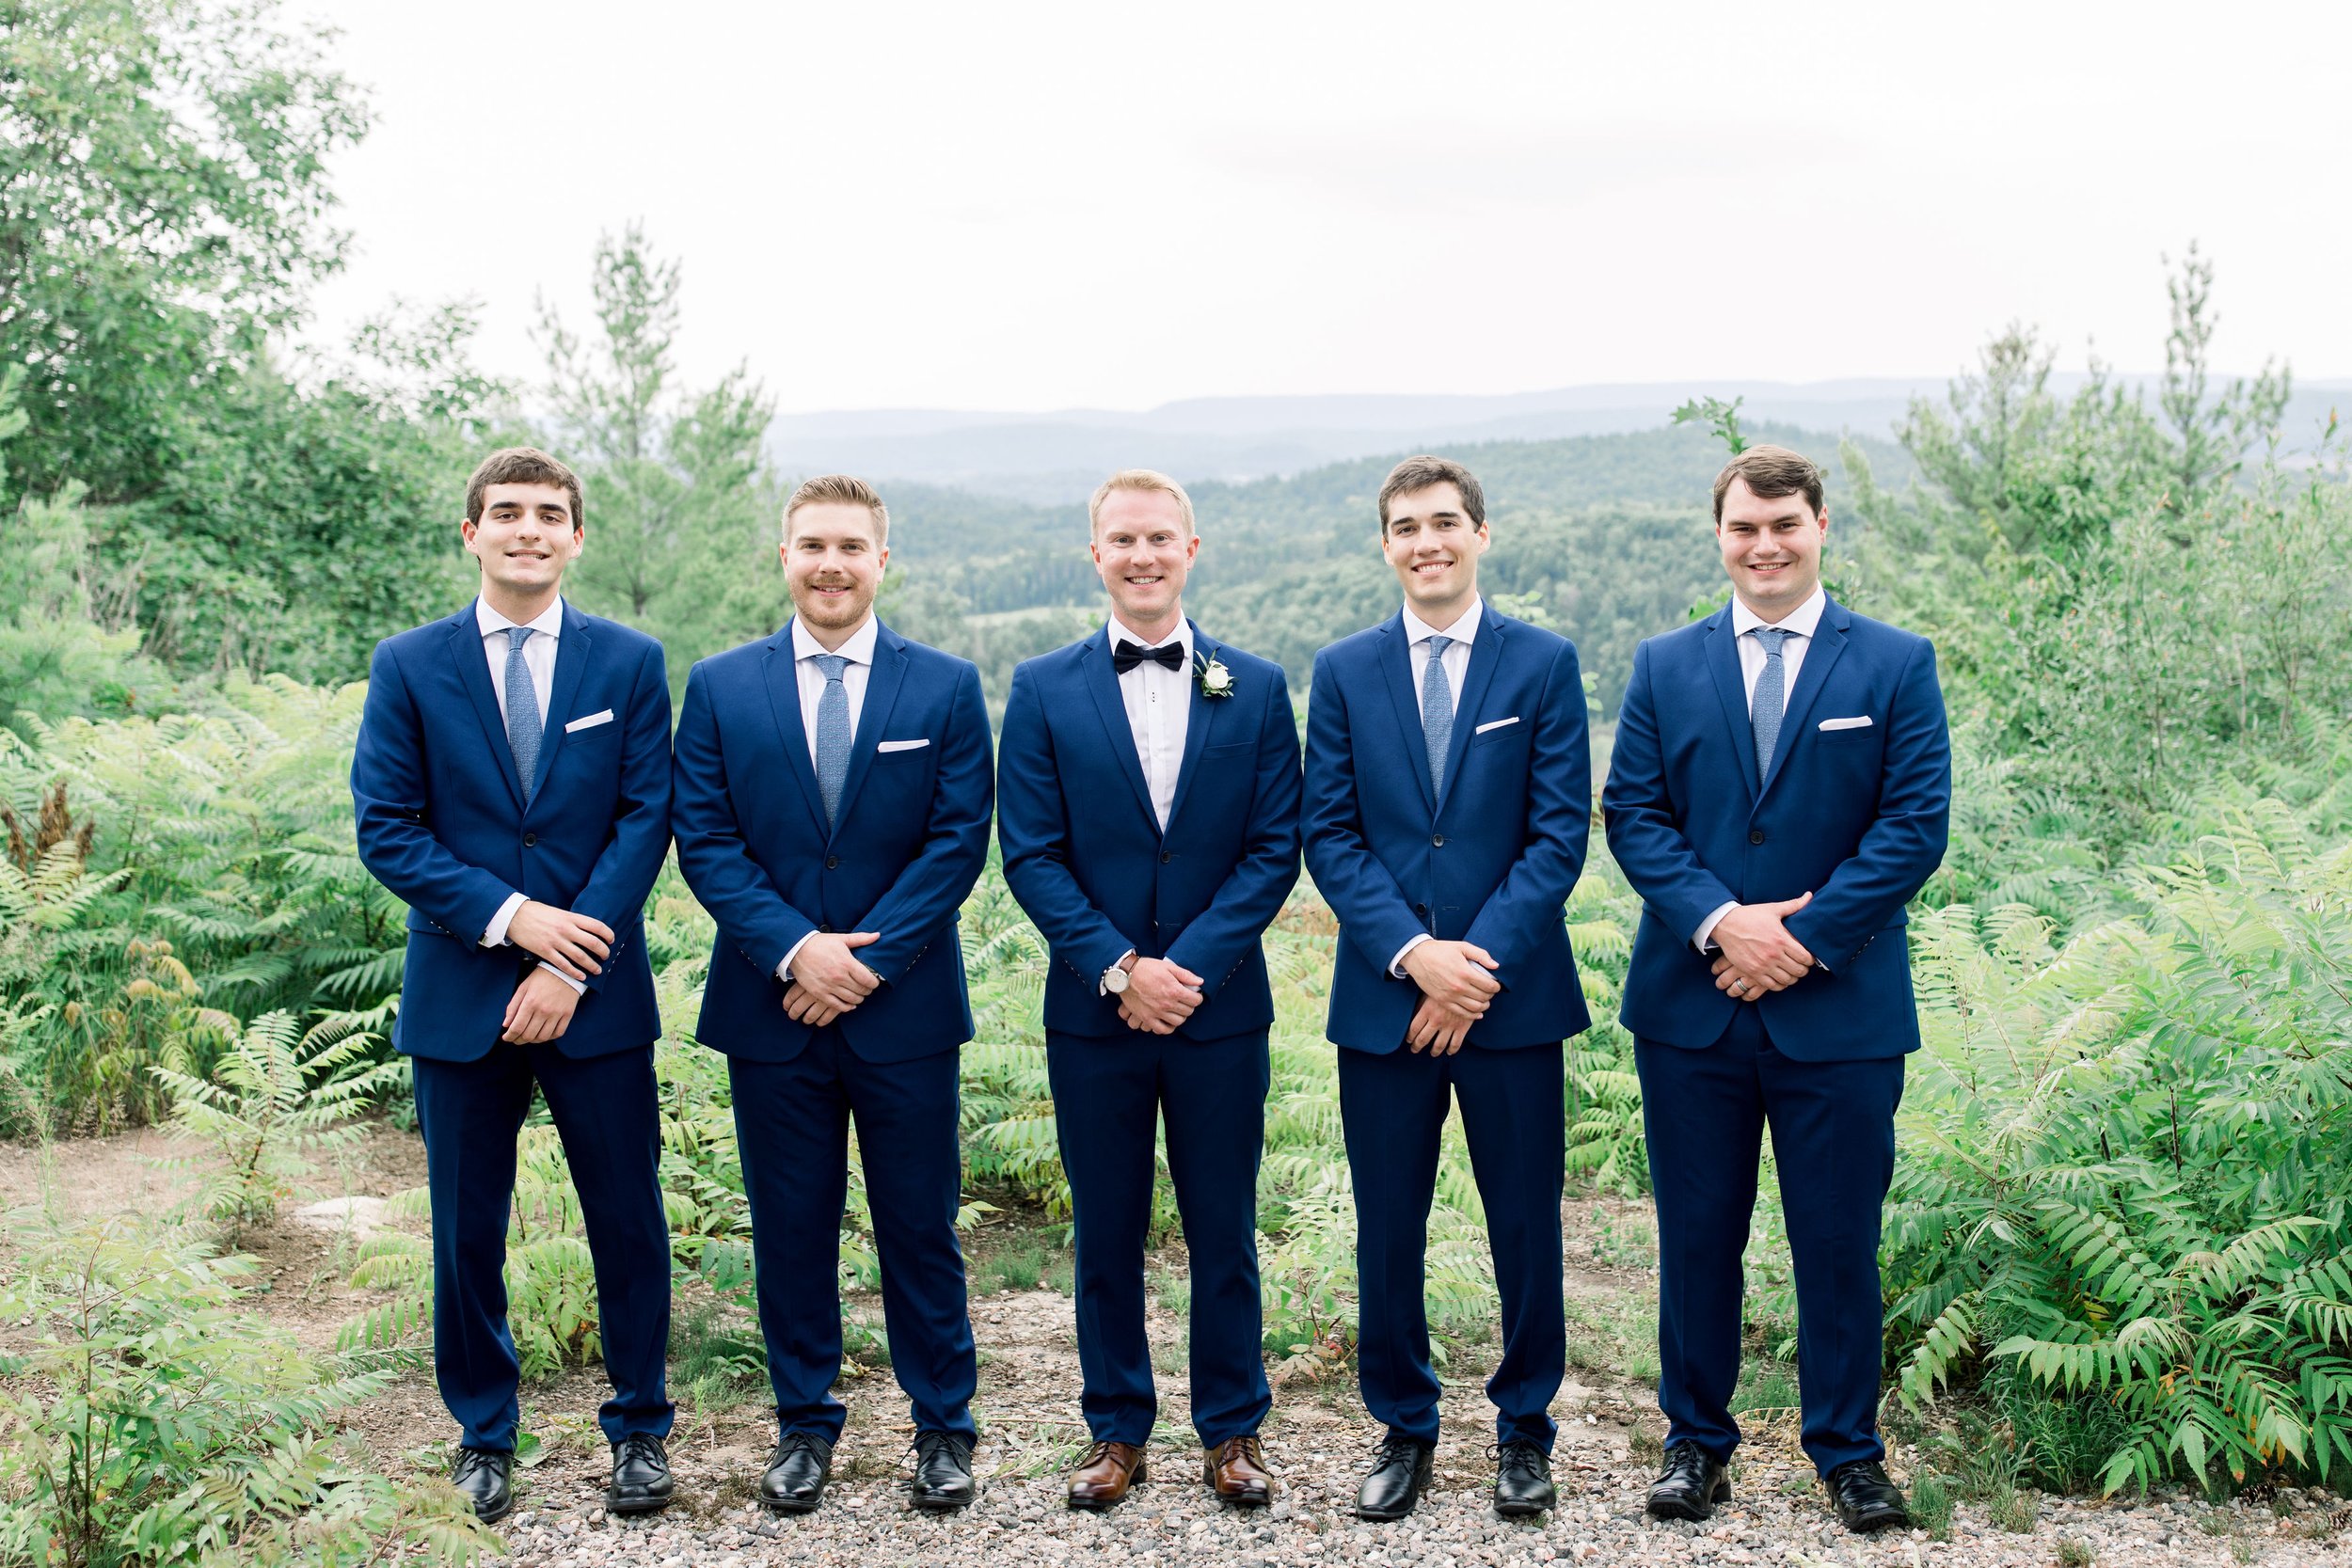  Groomsmen portrait with men standing outside at Le Belvedere by Chelsea Mason Photography. Wakefield wedding groomsmen in blue #Quebecweddings #elegantoutdoorwedding #Quebecweddingphotographers #Chelseamasonphotography #Chelseamasonweddings 